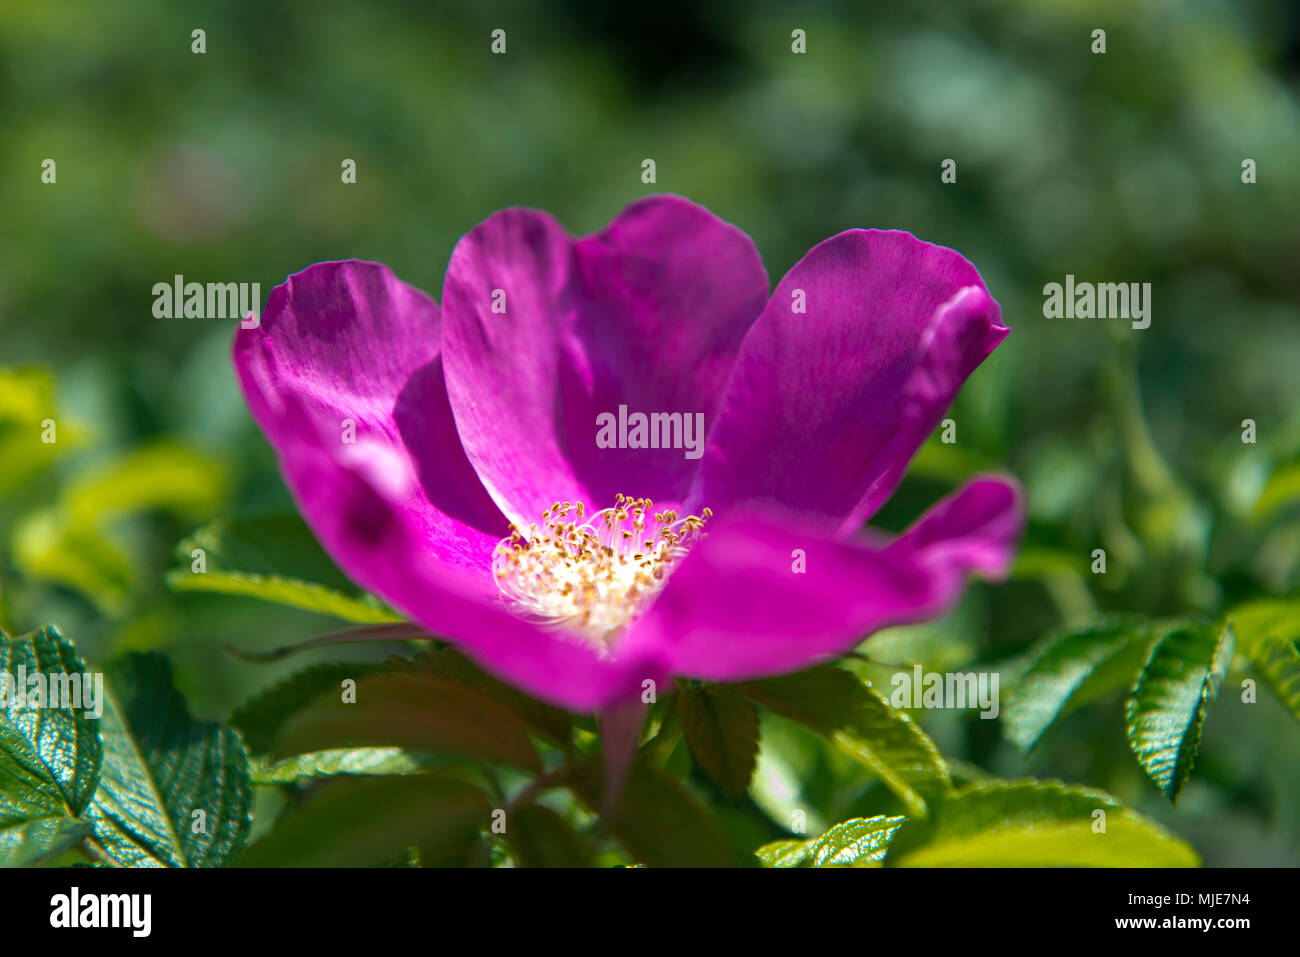 Rose blossom, small cottage garden Stock Photo